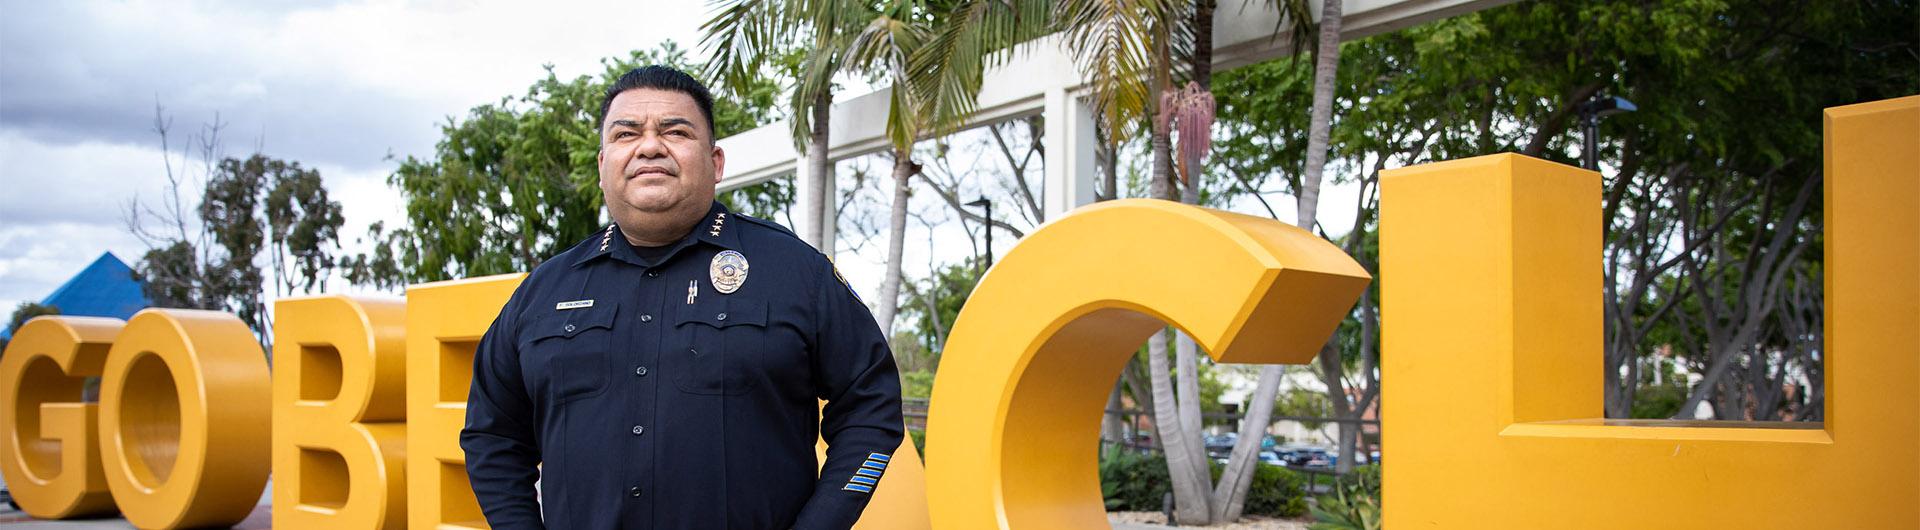 Police chief Fernando Solarzano stands in front of Go Beach letters